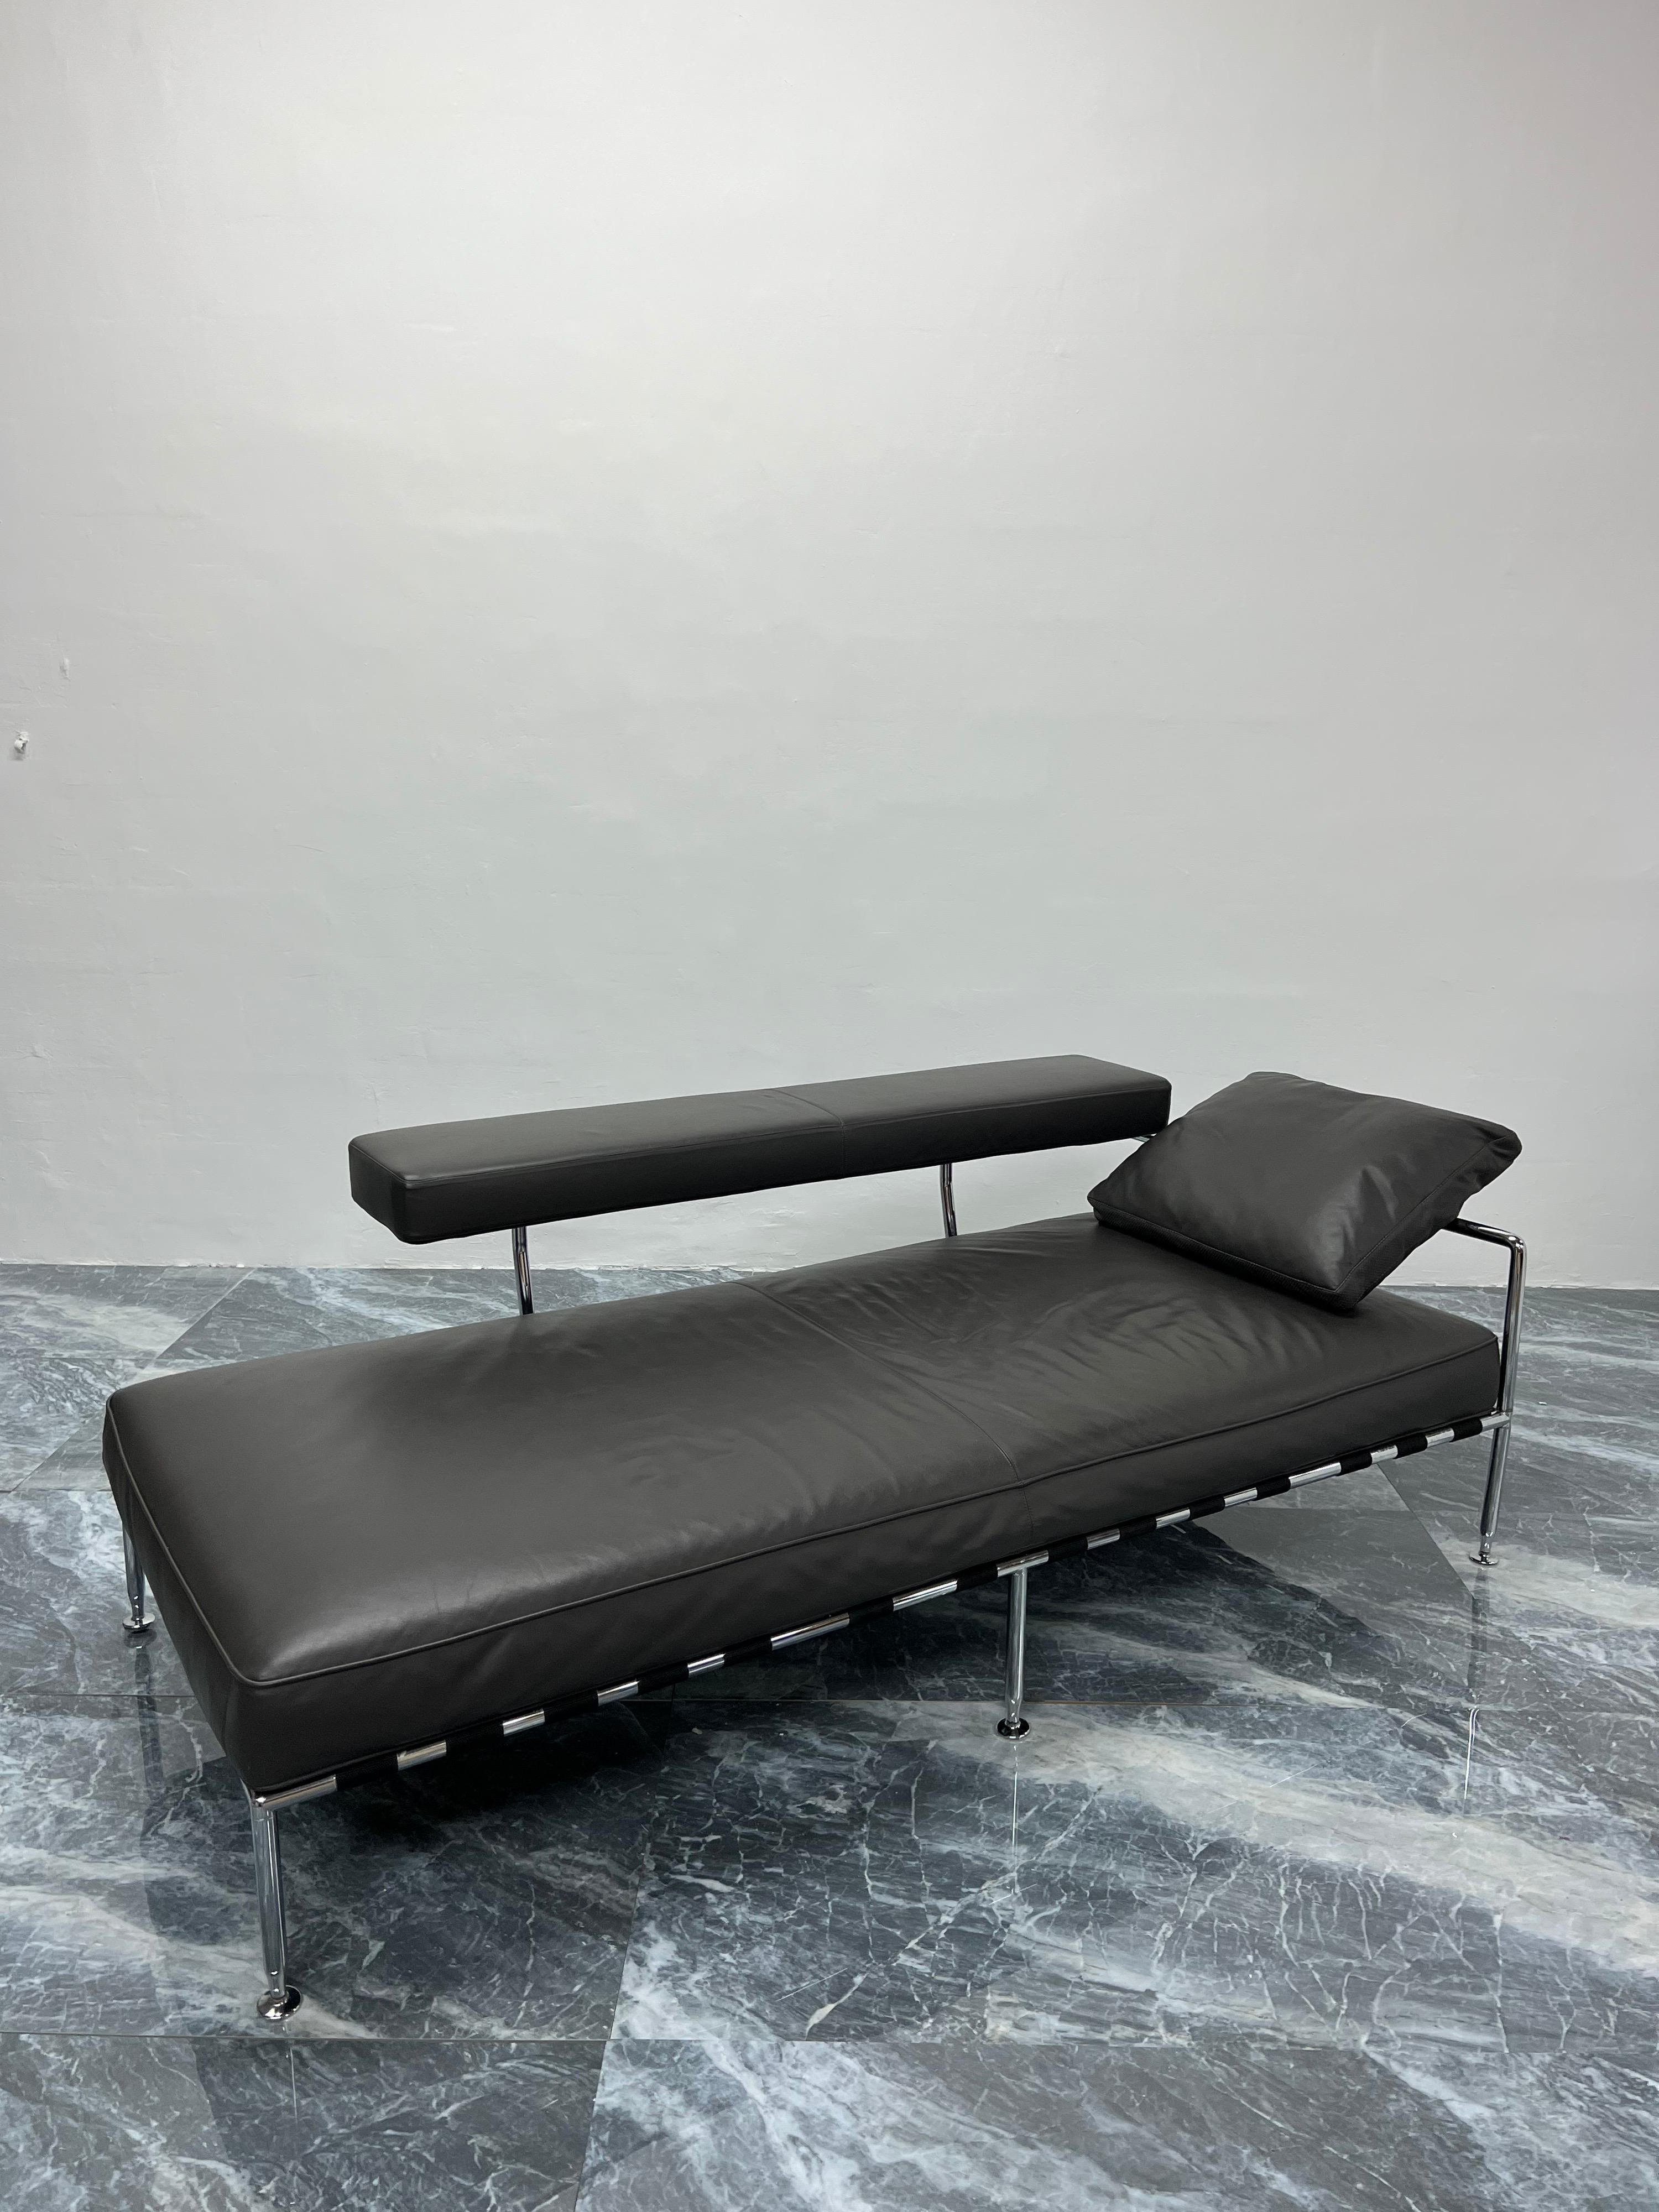 Charcoal gray leather and tubular chrome daybed or chaise lounge designed by Antonio Citterio and produced by B&B Italia. The leather arm rotates outward to make more room on the bed.